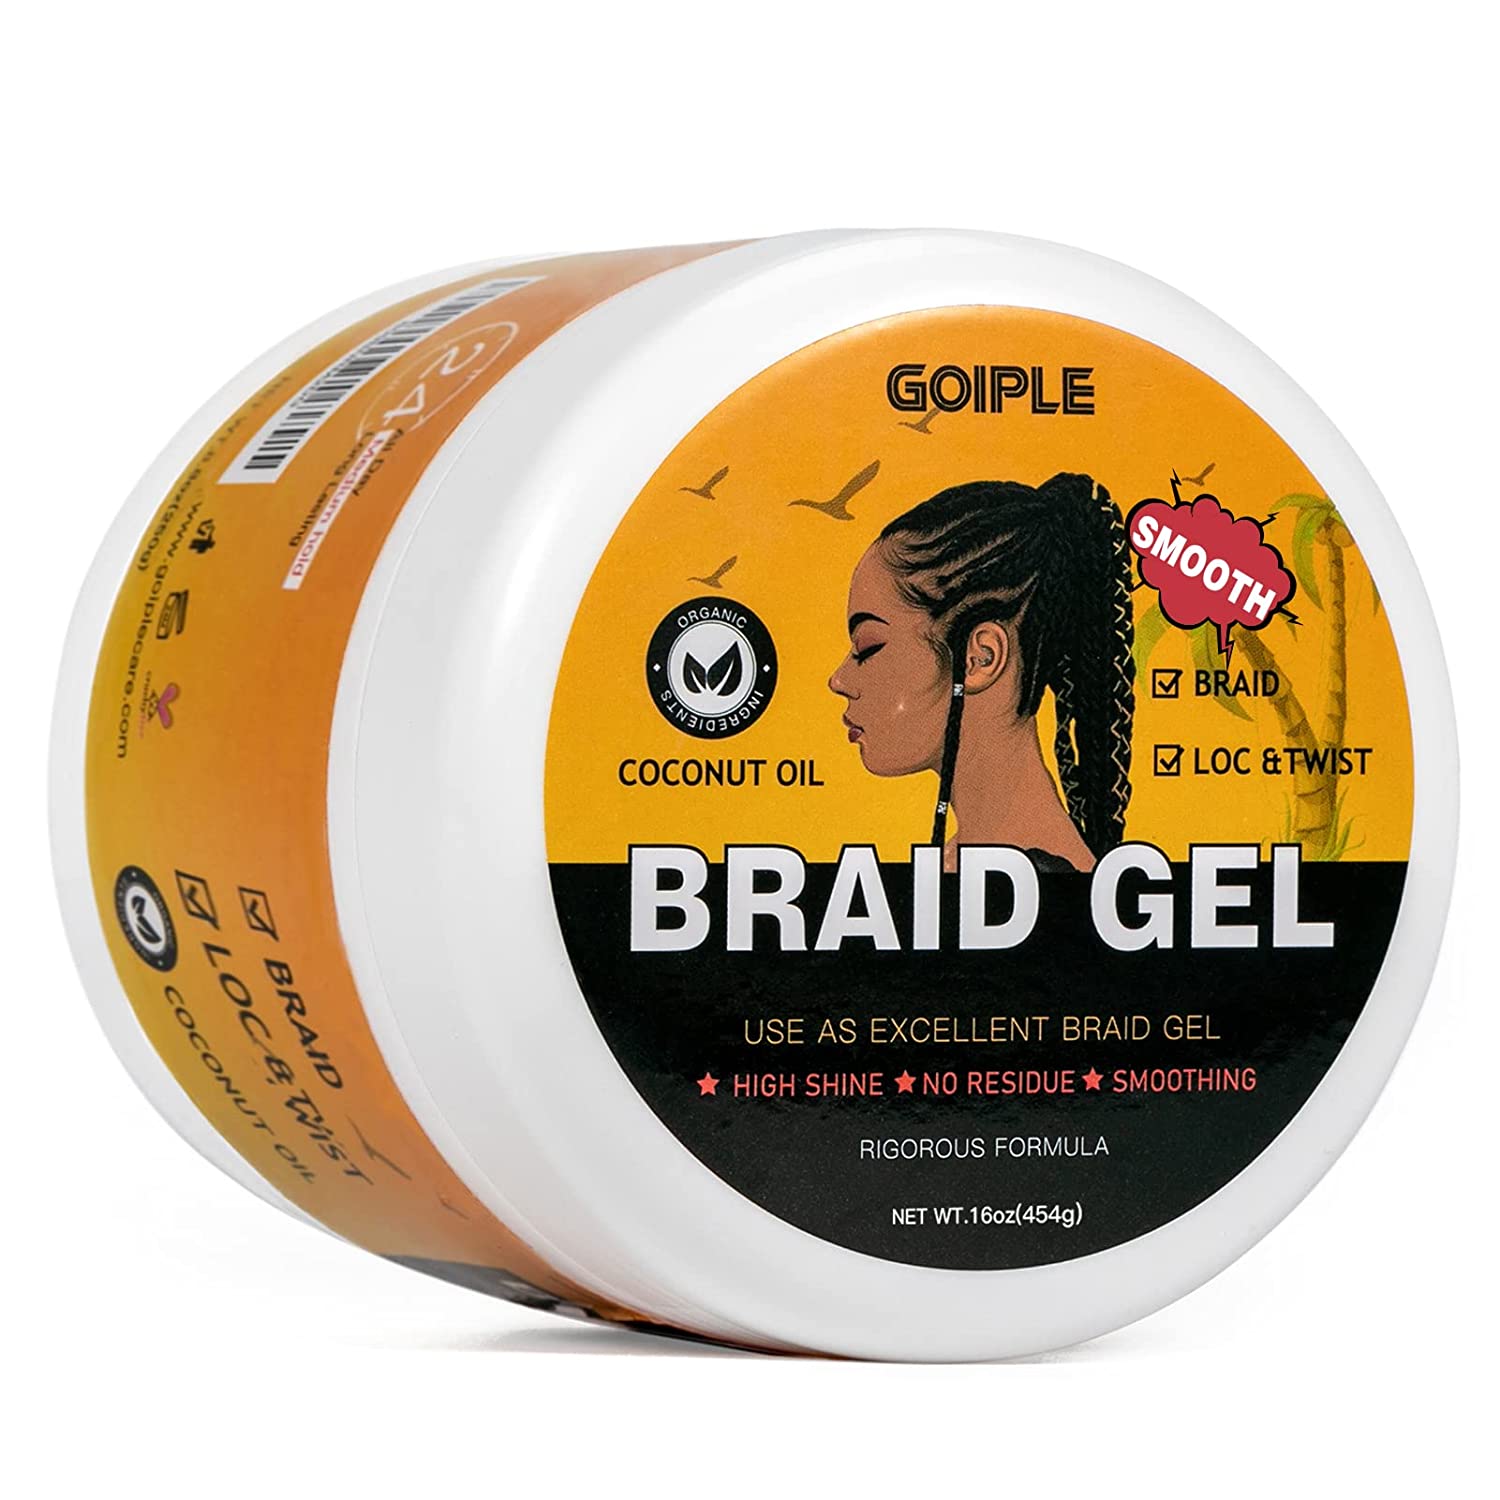 16oz-Strong-Hold-Braid-Gel - Extreme Hold Hair Styling Essential